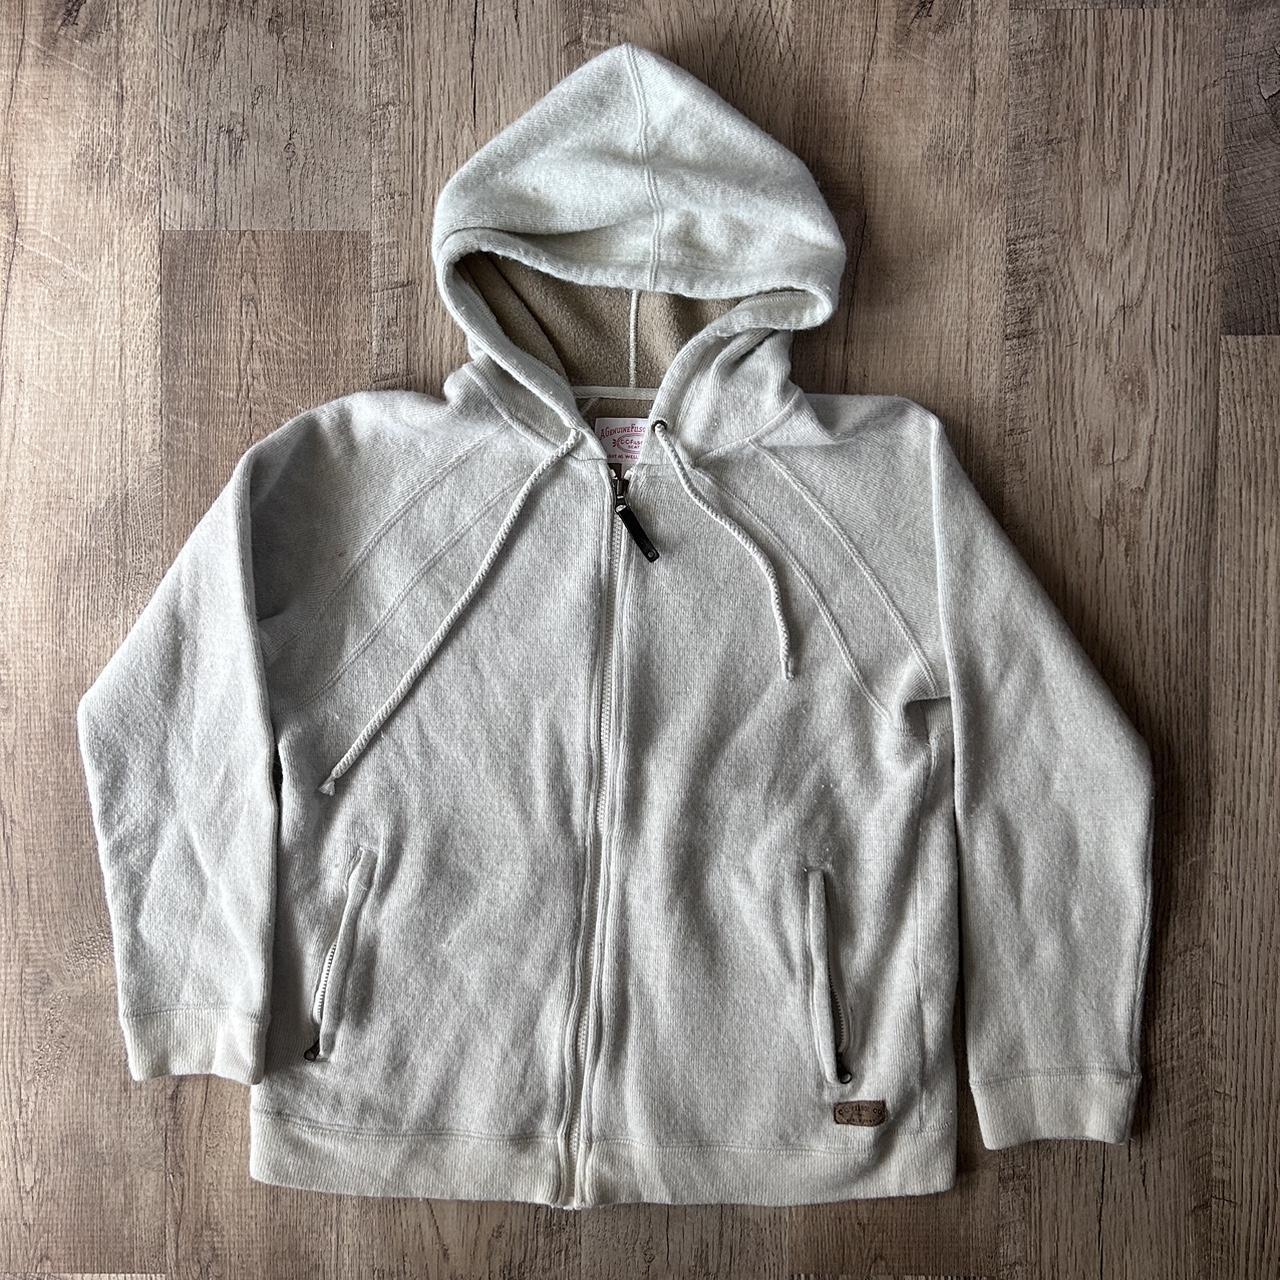 item listed by sanerssteals